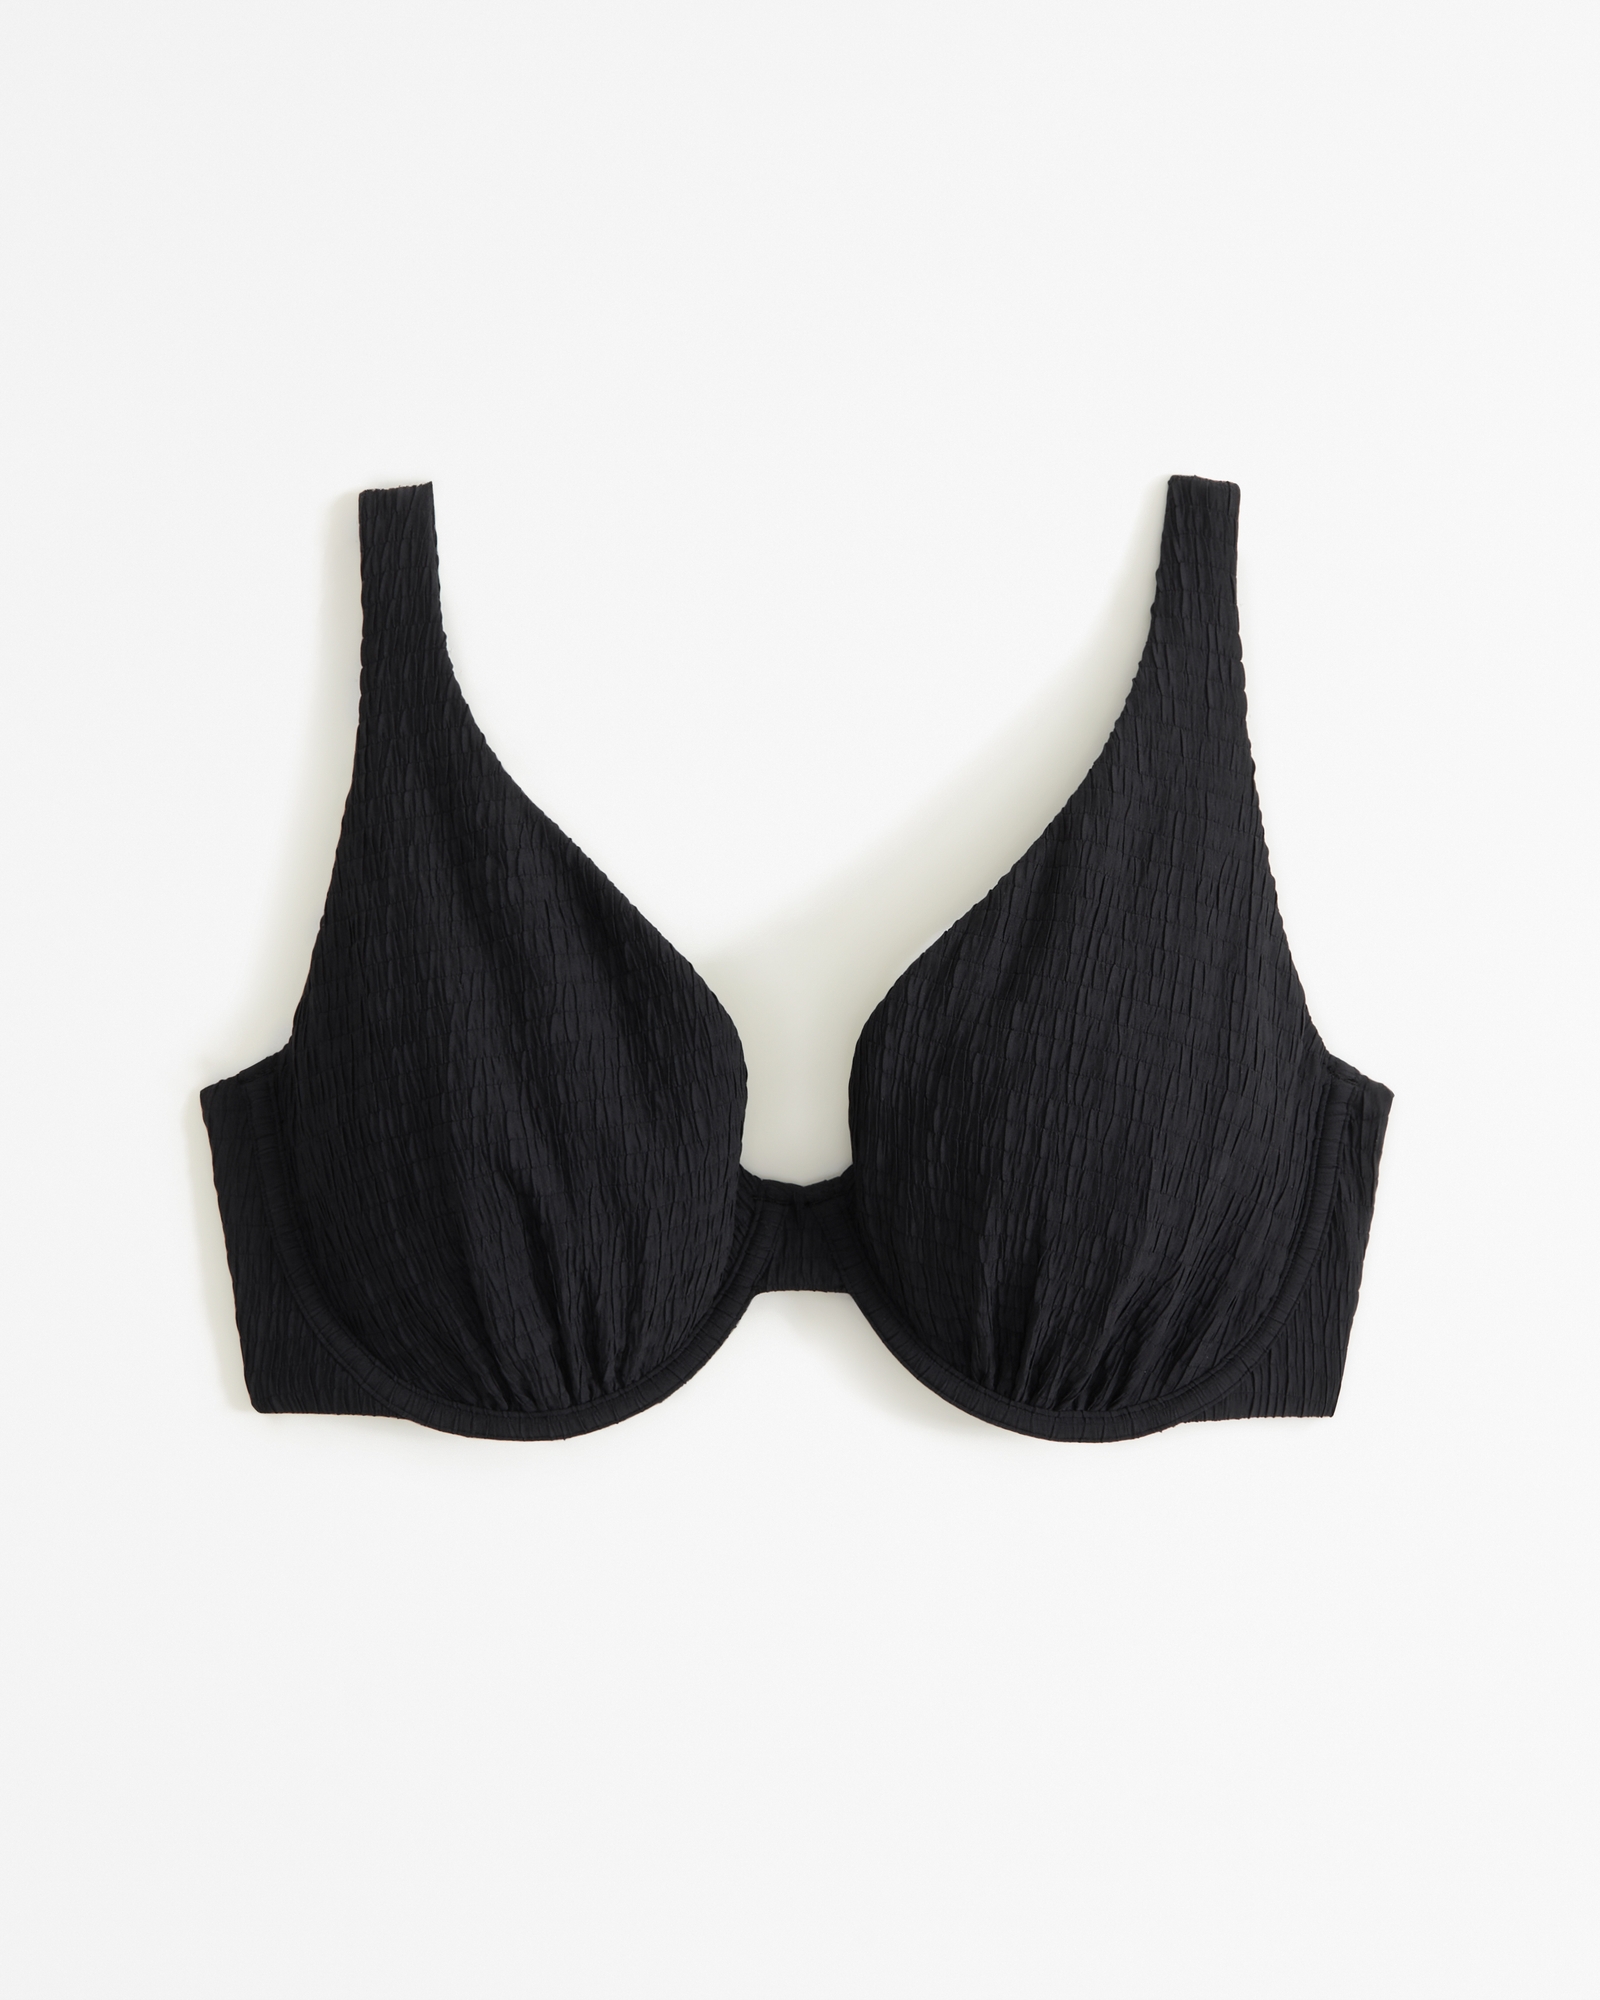 Victoria's Secret: Last chance! $40 So Obsessed bra AND panty.